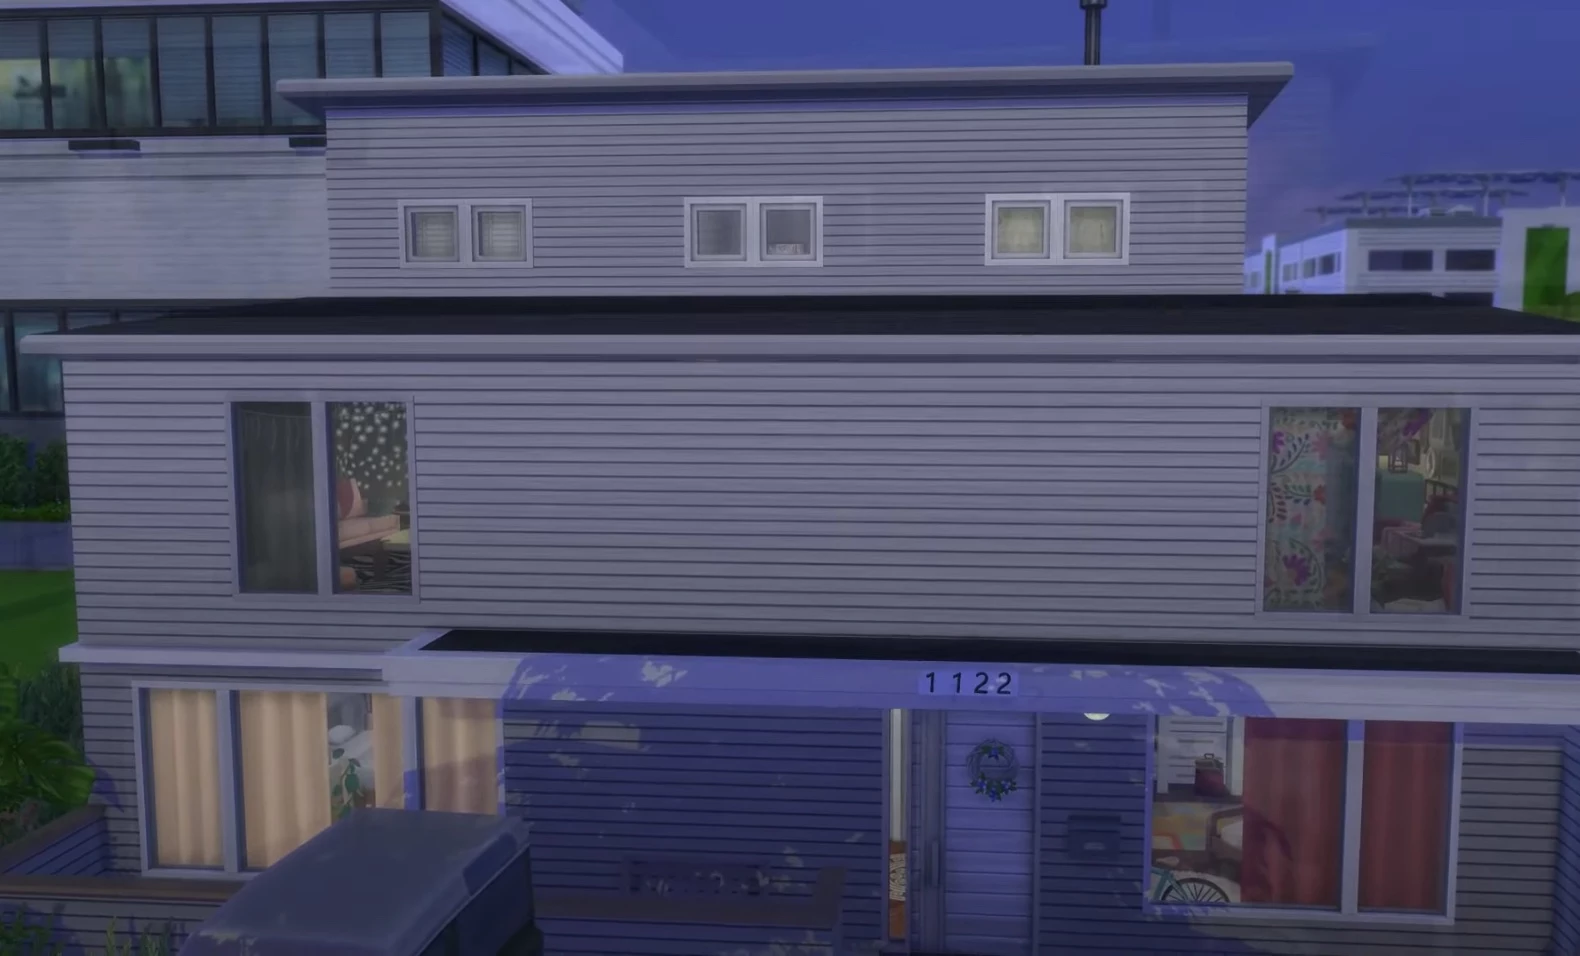 Scene of Idaho Murders Re-Created in Sims Video Game Video